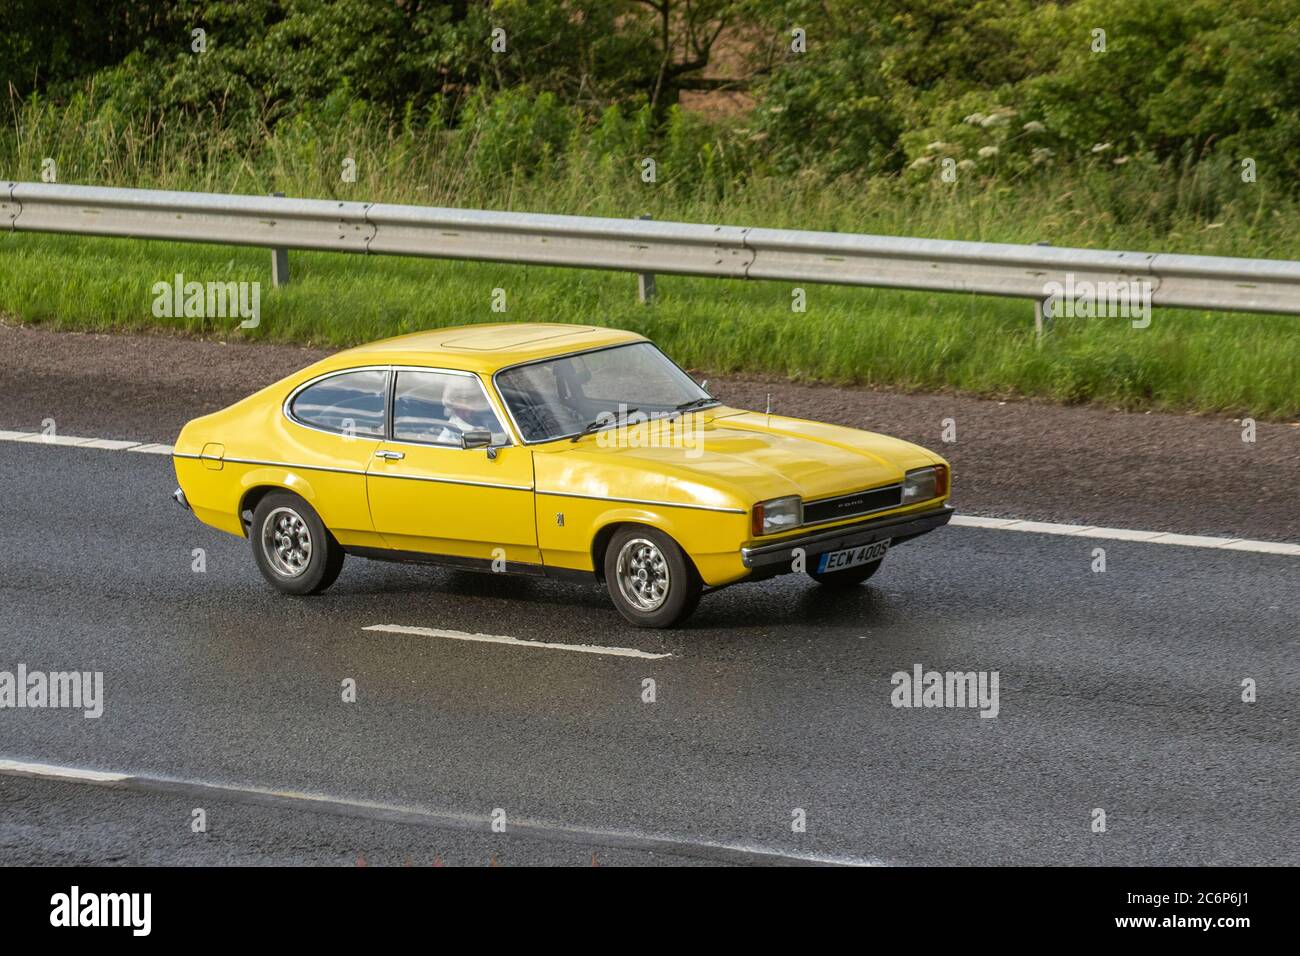 1977 70s yellow Ford Capri Ii Gl; Vehicular traffic moving vehicles, cars driving vehicle on UK roads, classic cars, cherished, veteran,  restored old timer, collectible motors, vintage, heritage, old preserved, collectable motors, motoring on the M6 motorway highway network. Stock Photo